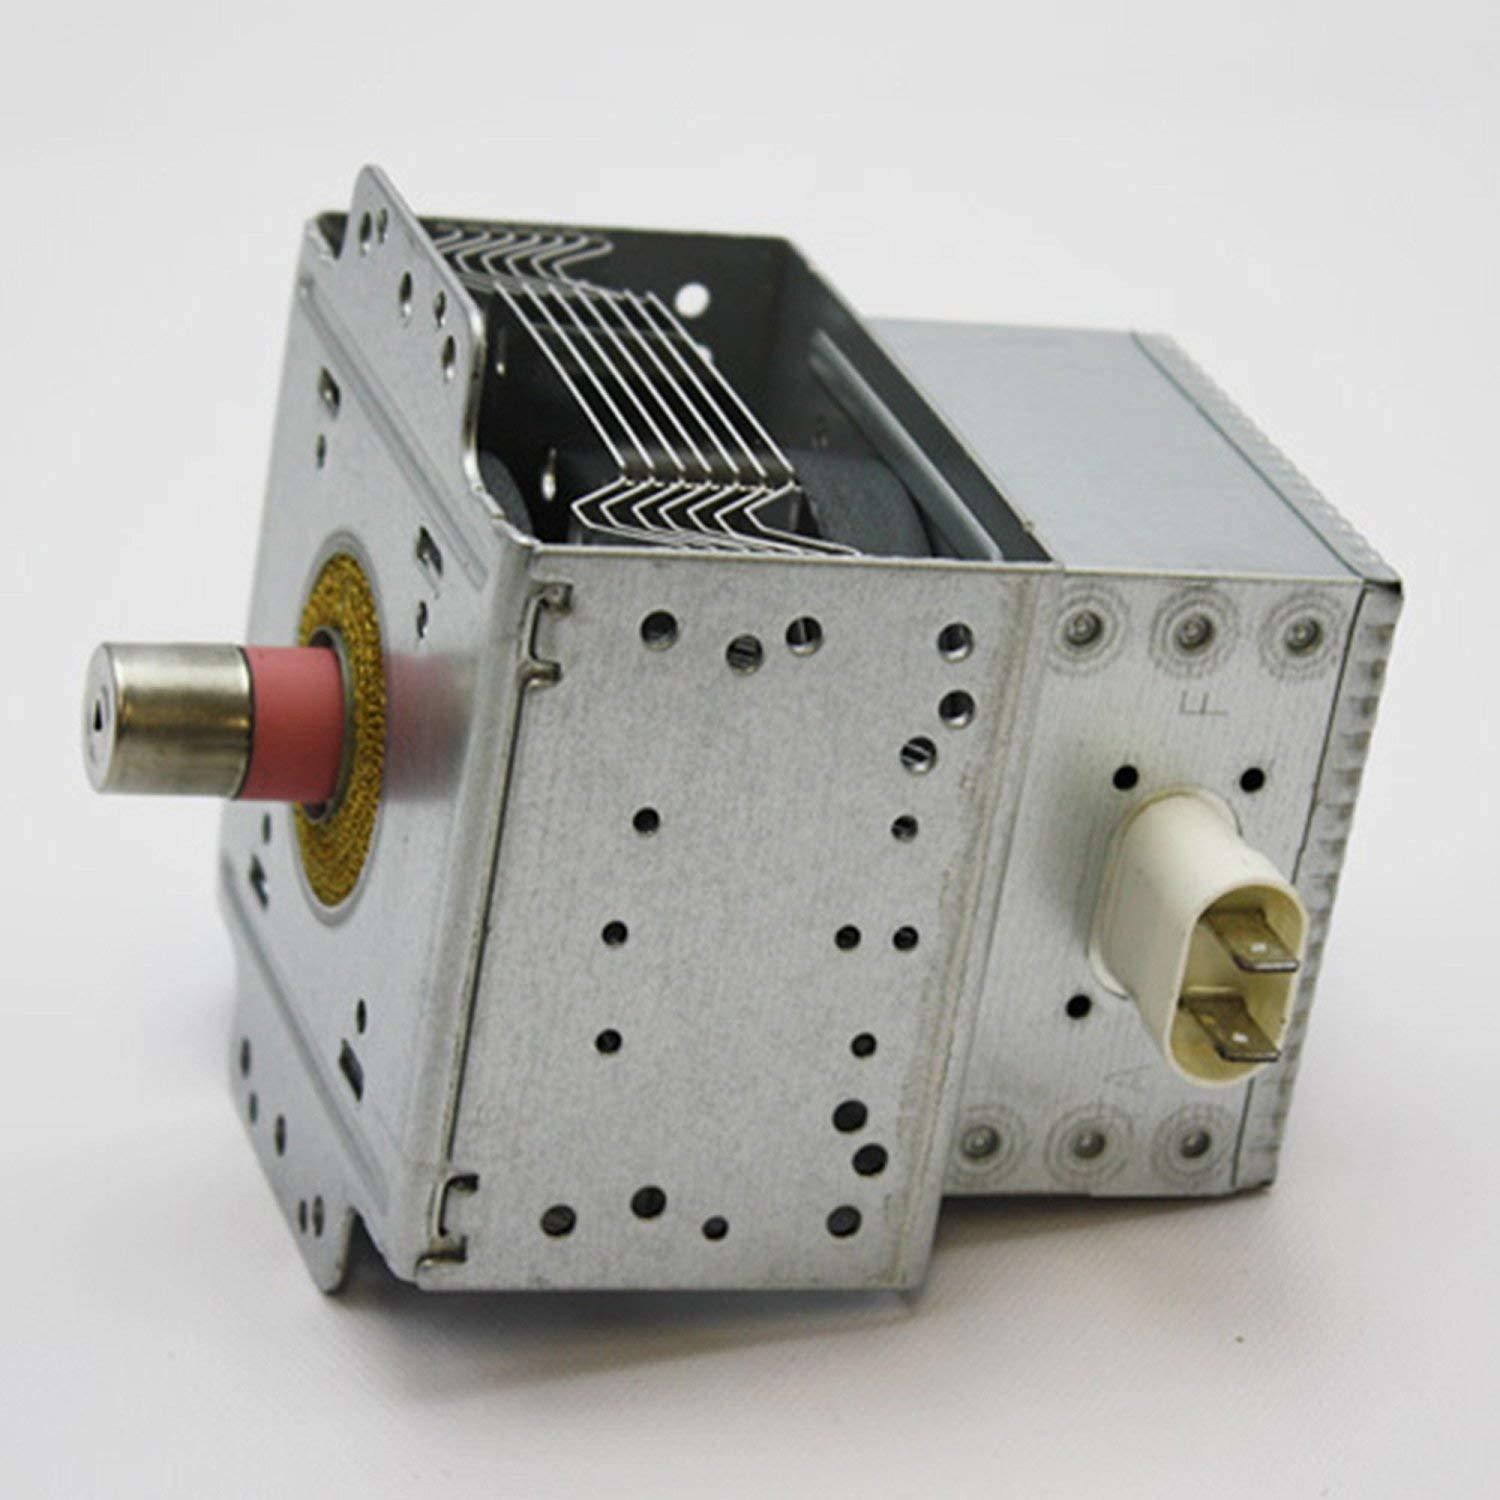 Microwave Magnetron